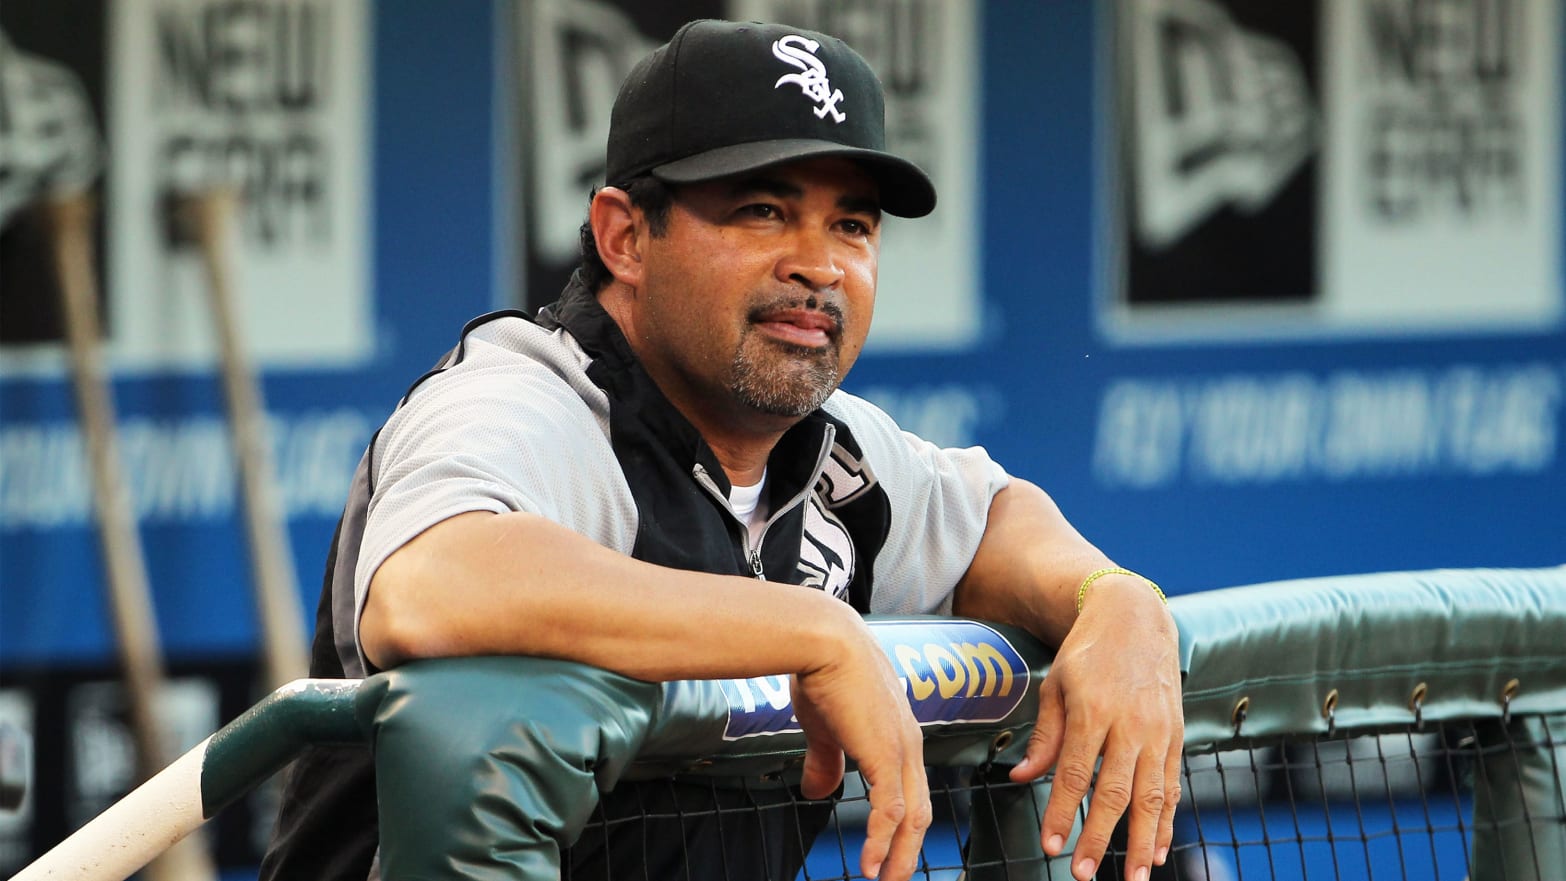 OZZIE GUILLEN TO HEADLINE 75th ANNUAL PITCH & HIT CLUB OF CHICAGO